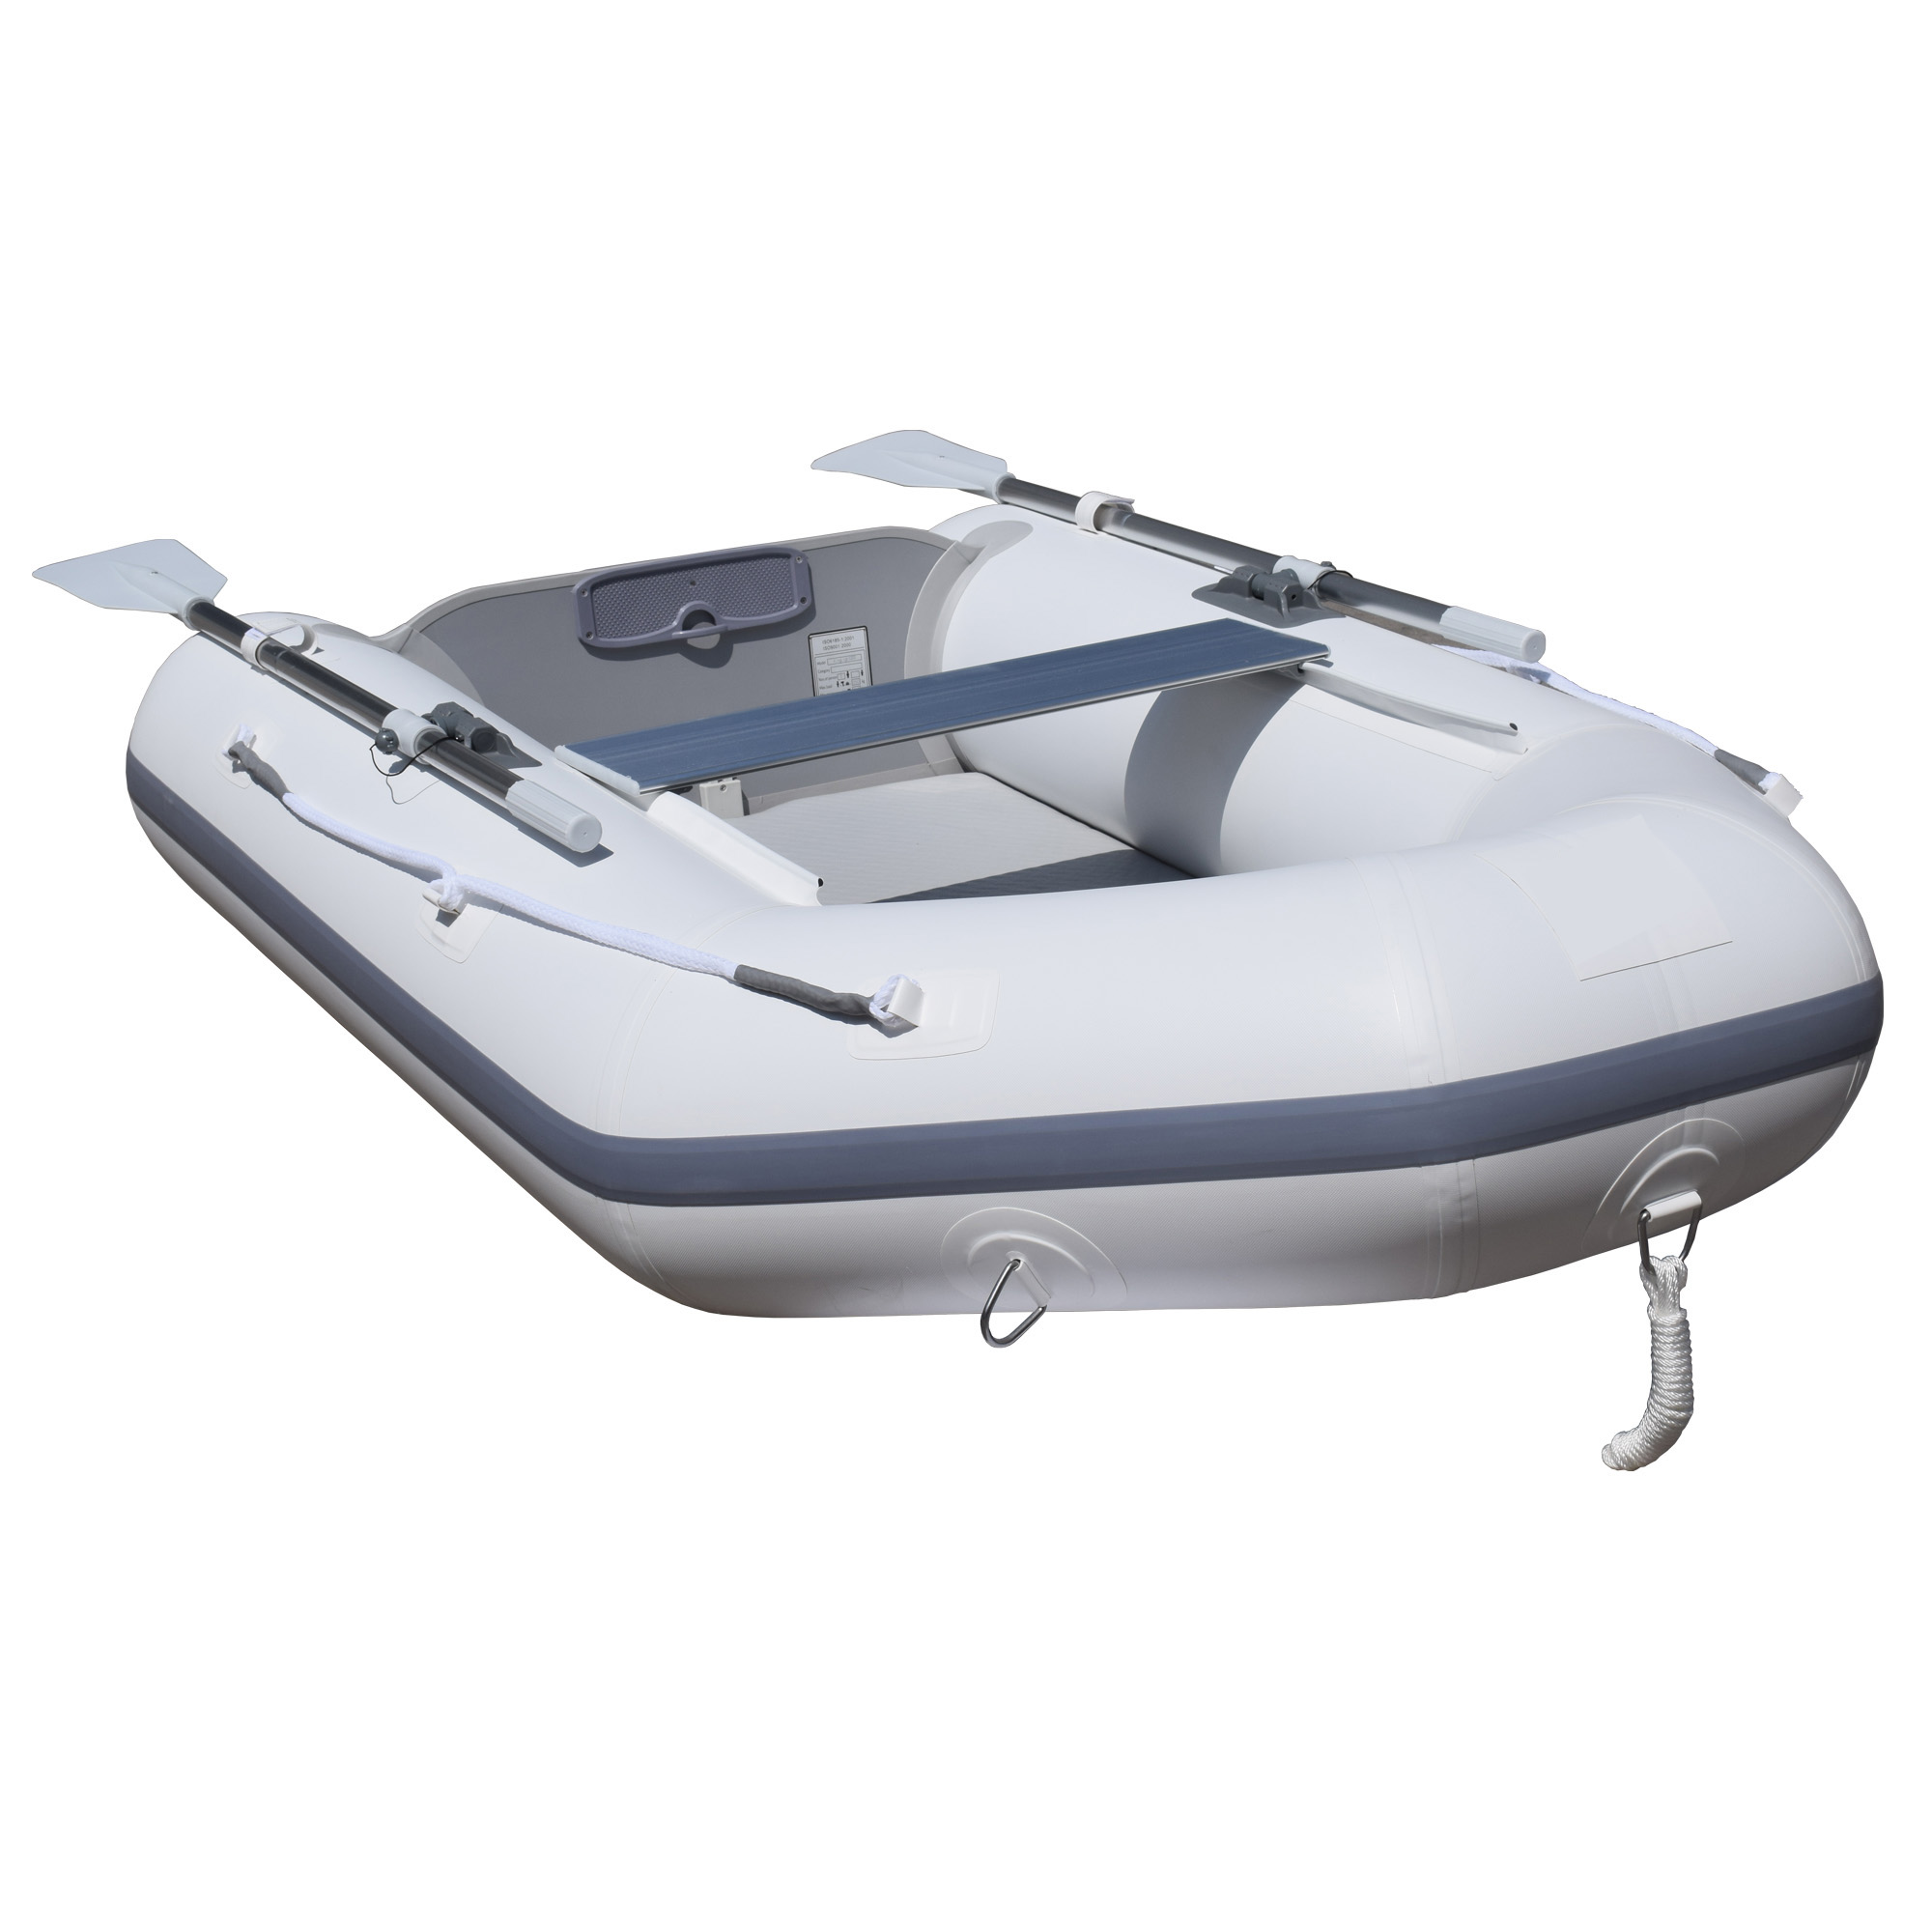 Kinglight Inflatable Boat Fishing Dingy: The Ultimate Foldable Dinghy